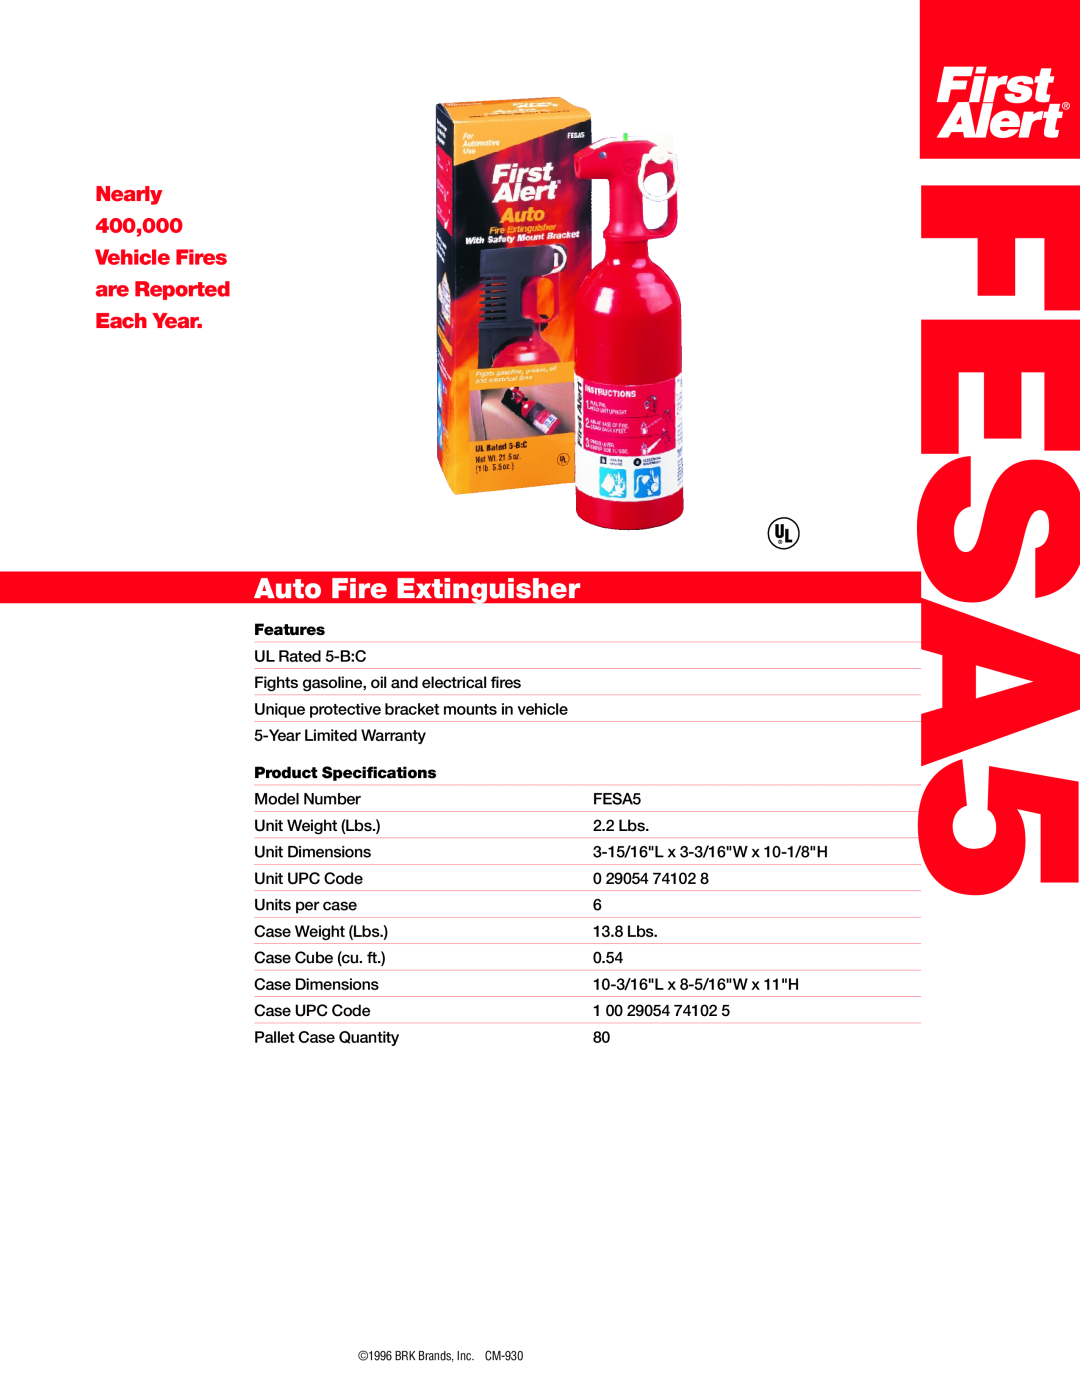 First Alert FESA5 warranty Auto Fire Extinguisher, Nearly 400,000 Vehicle Fires are Reported Each Year, Features 